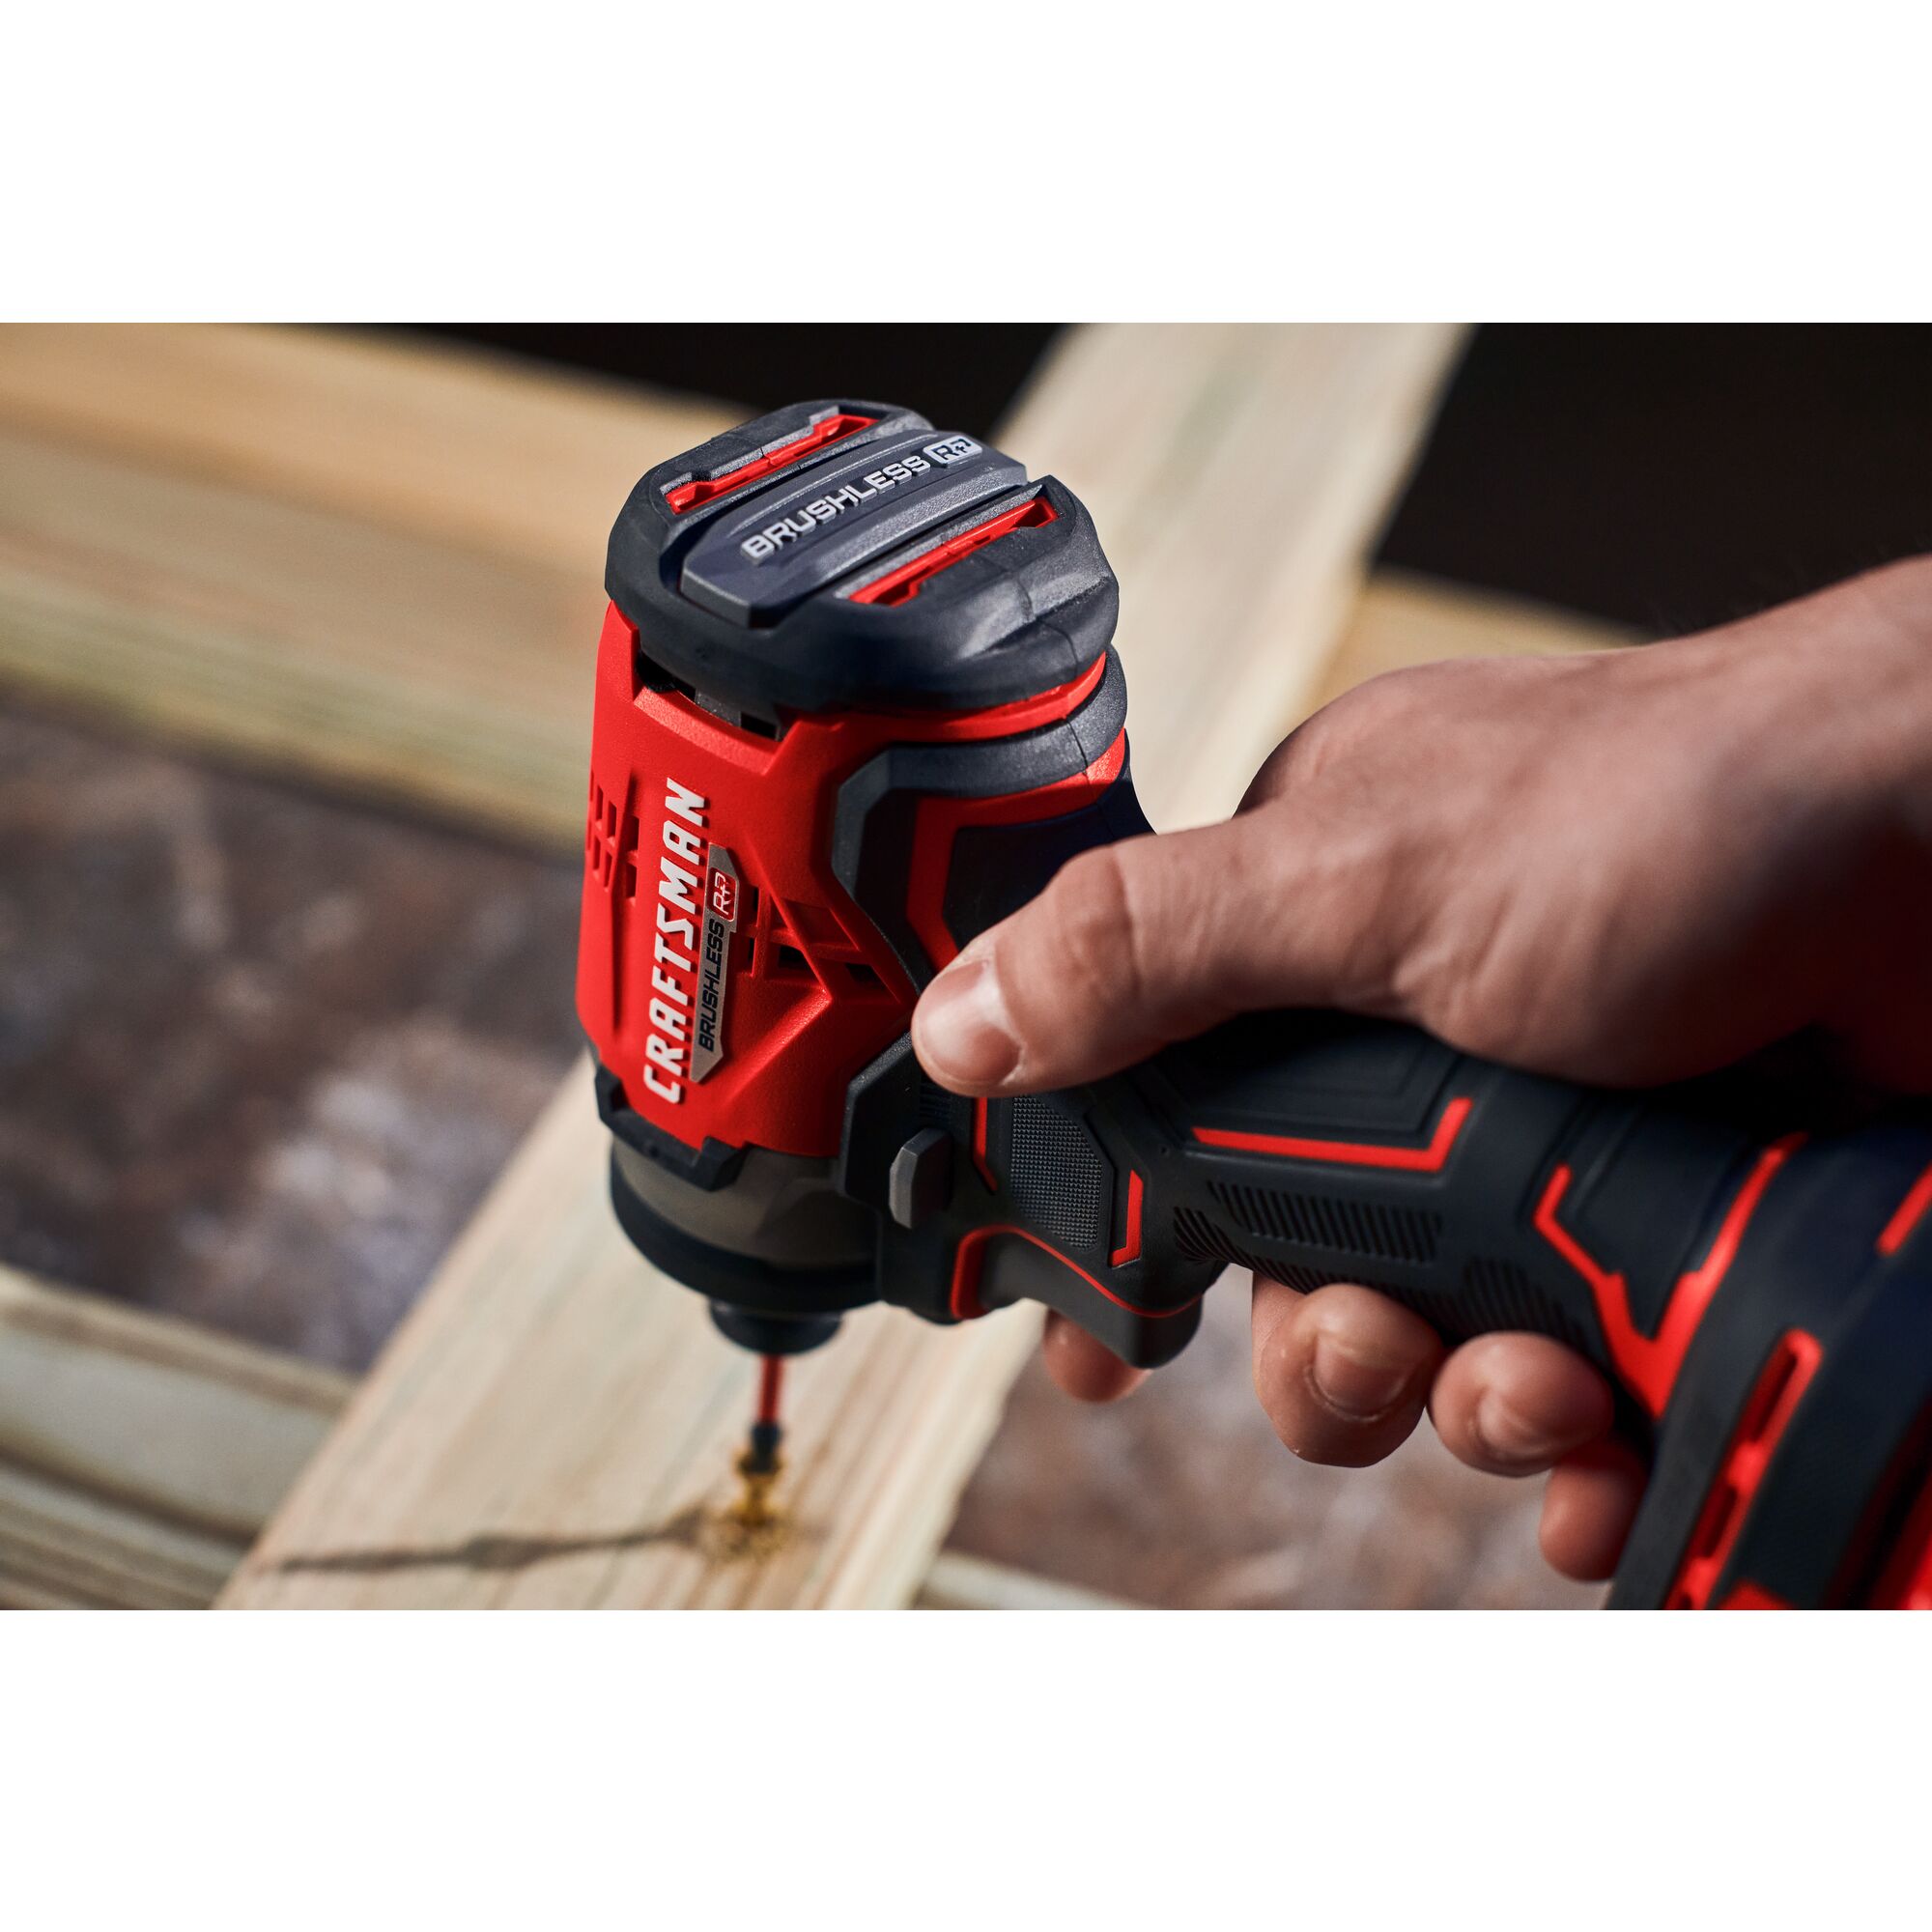 The Best Cordless Drills for Ice Auger Drilling: Unleashing the